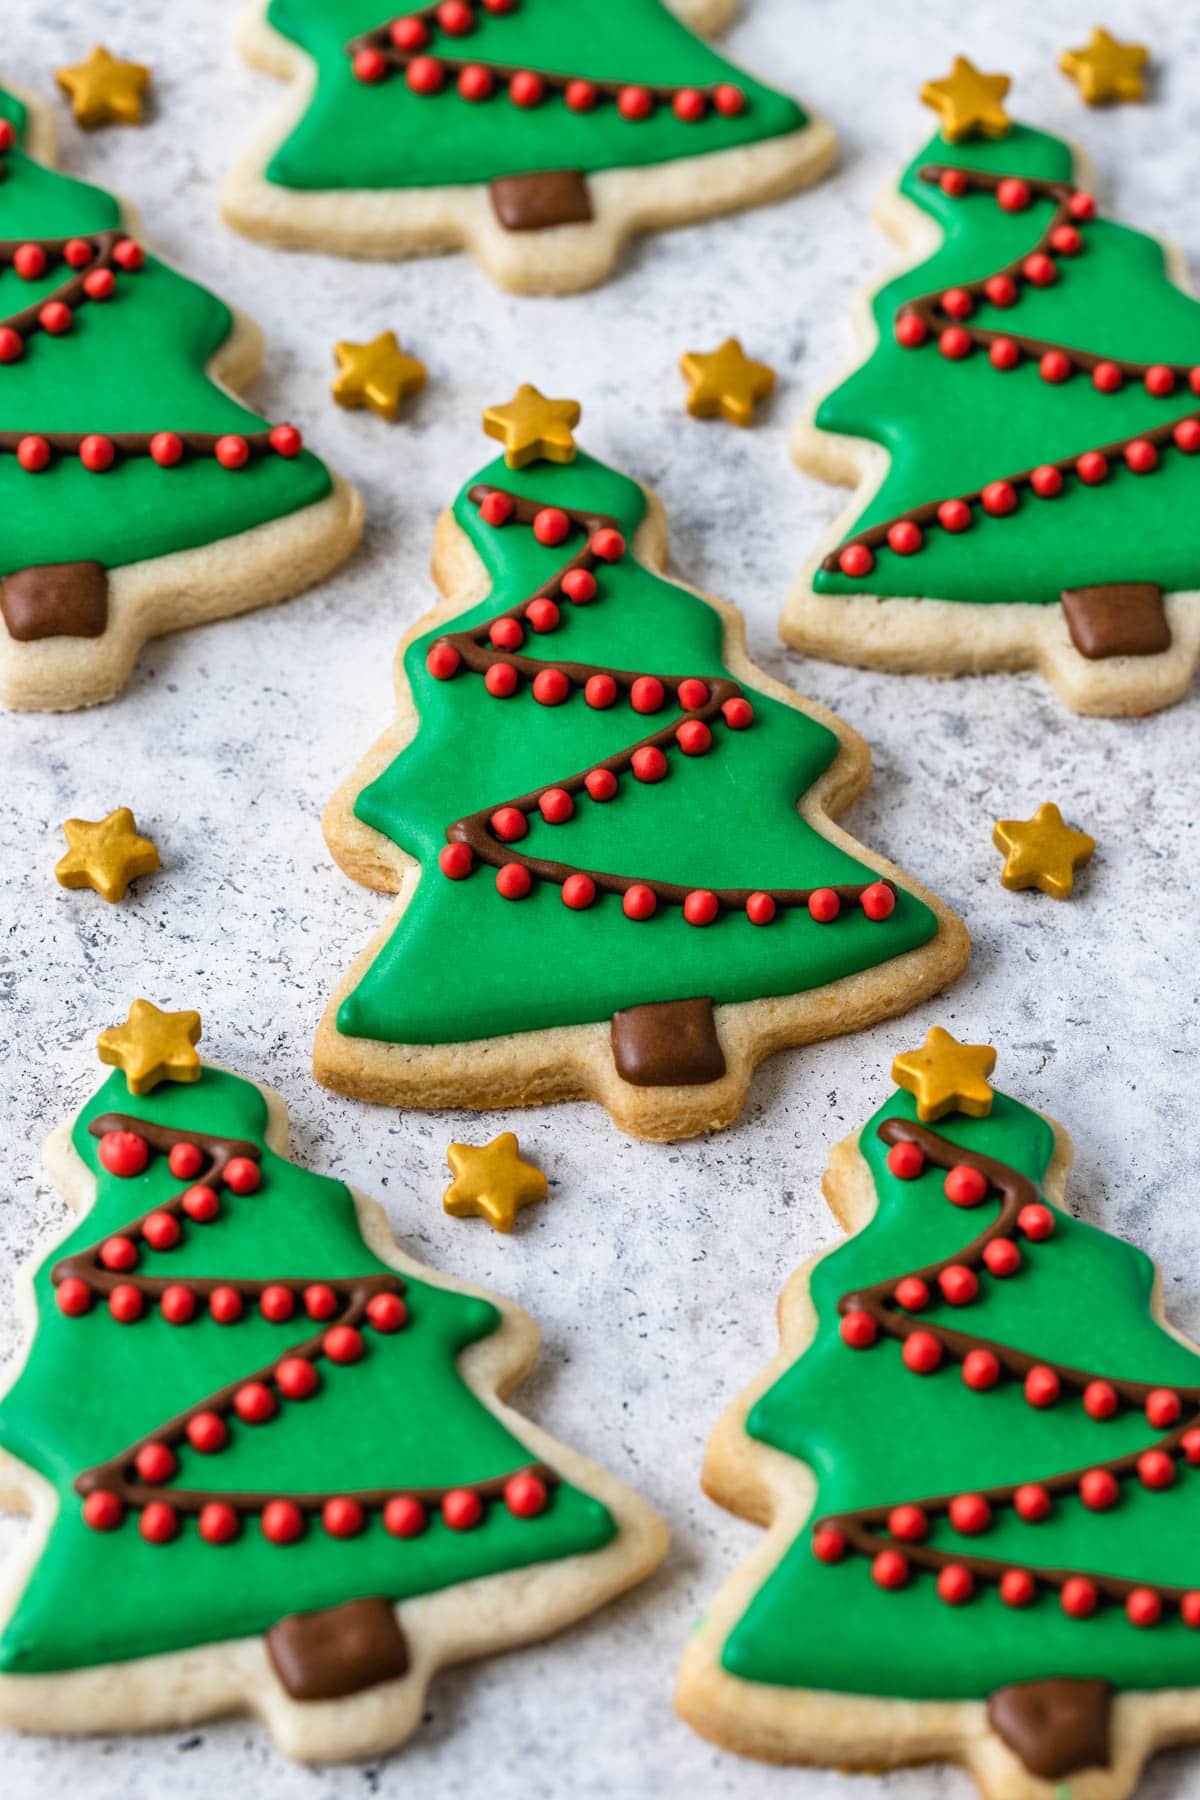 No Spread Sugar Cookies: Recipe for Decorating with Royal Icing